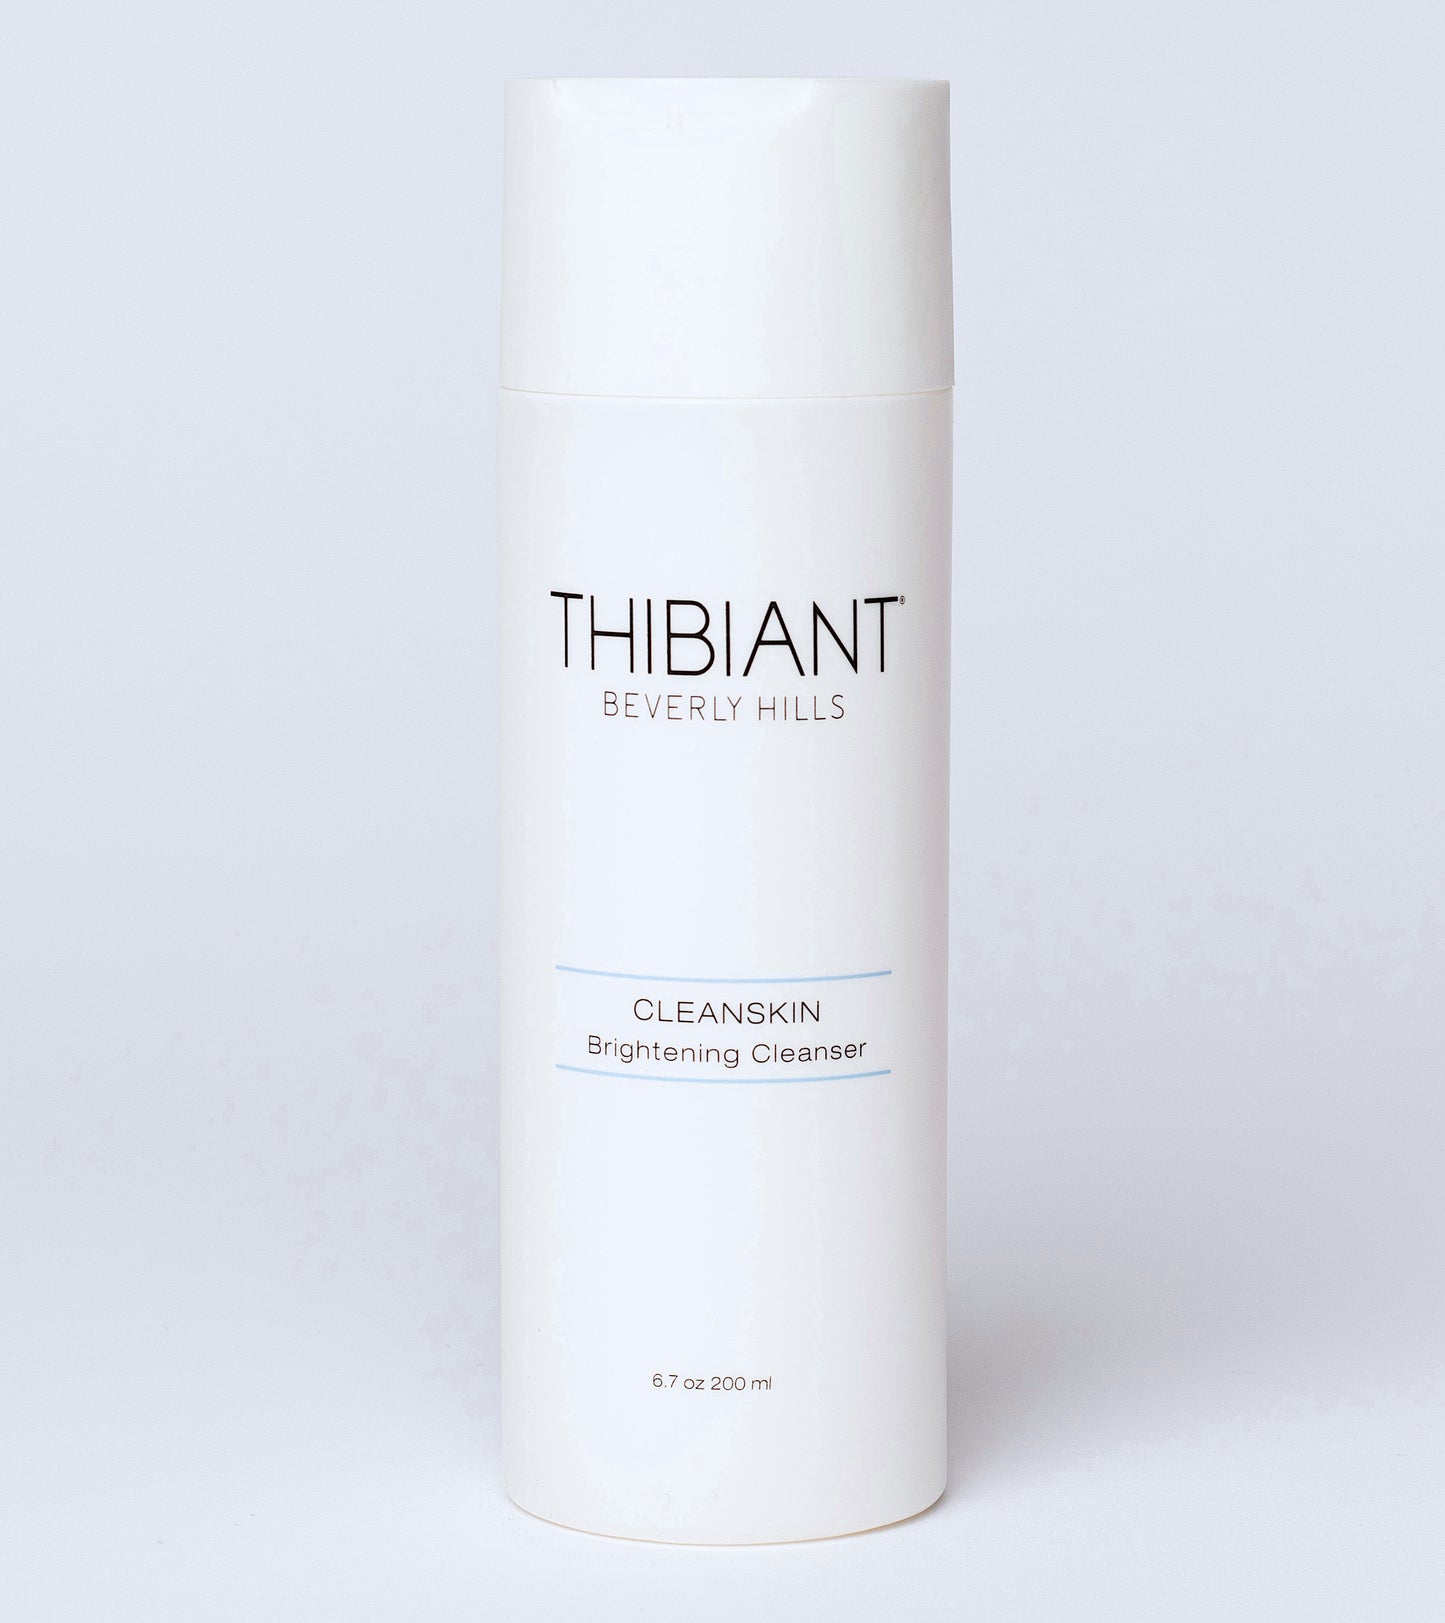 CleanSkin Brightening Cleanser - Coming Soon!  Now available to pre-order!